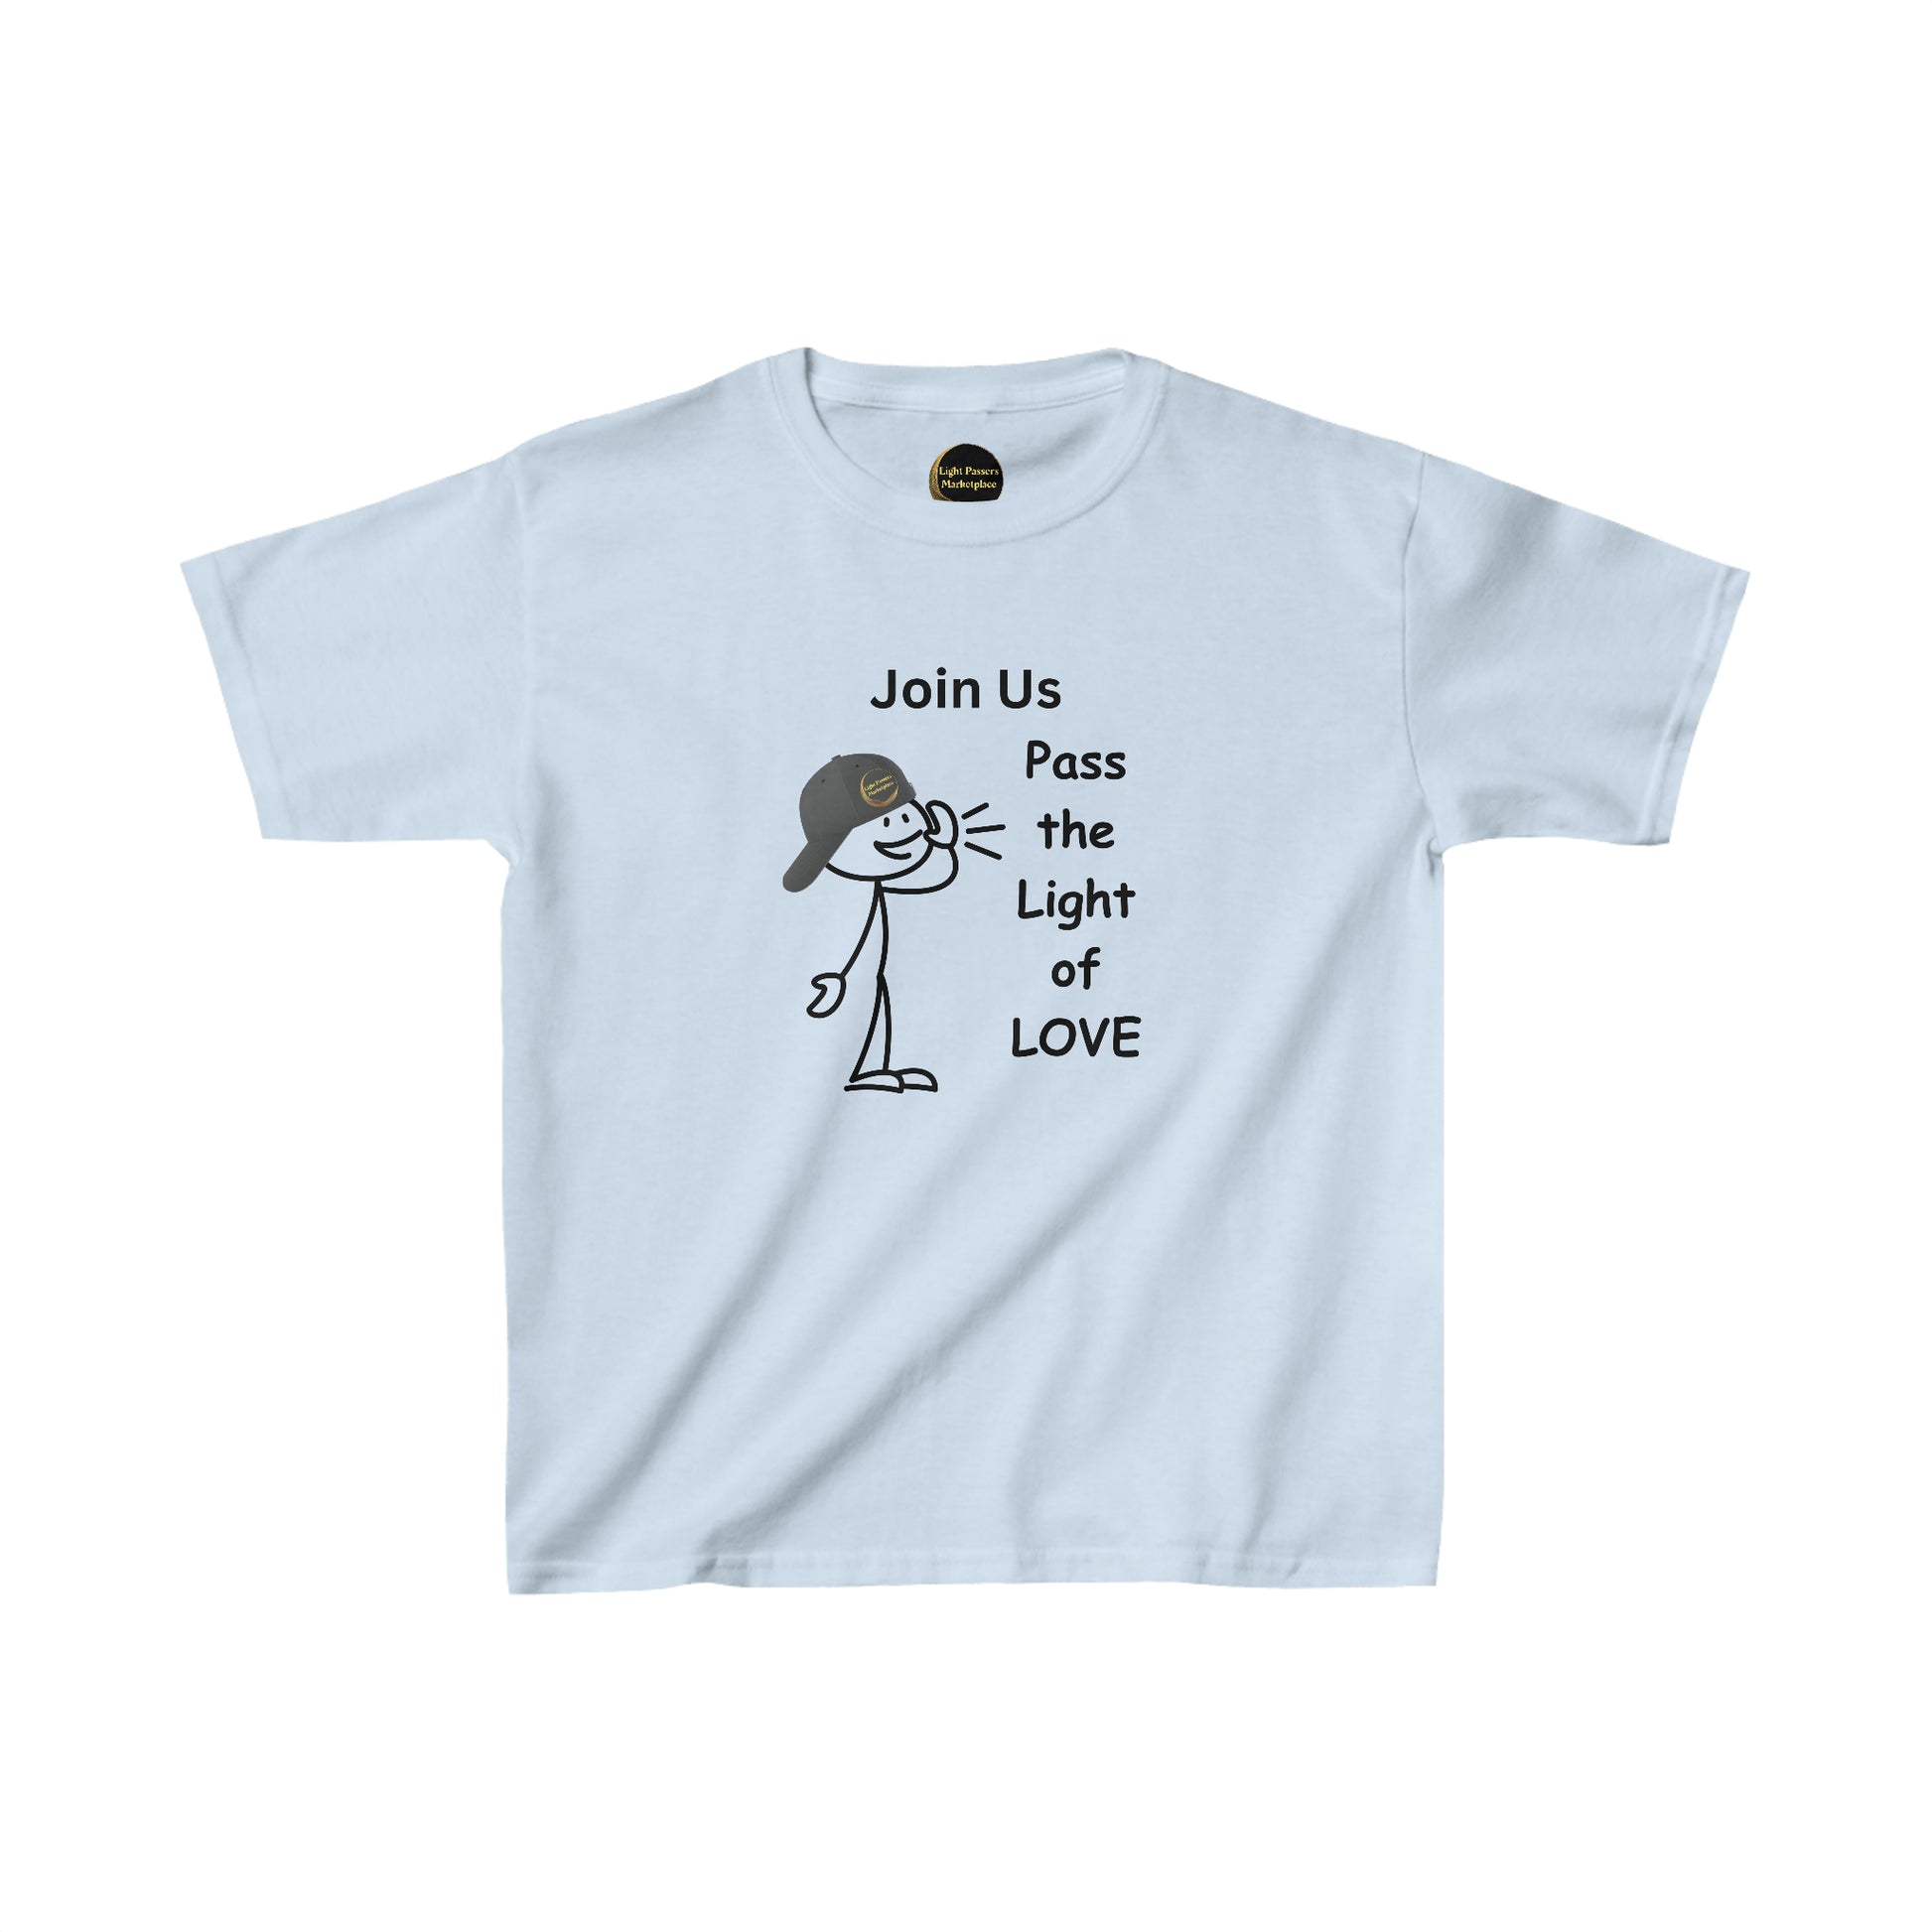 Youth white t-shirt featuring a cartoon stick figure with a cap. Made of 100% cotton, ideal for printing, with twill tape shoulders for durability and ribbed collar for curl resistance.